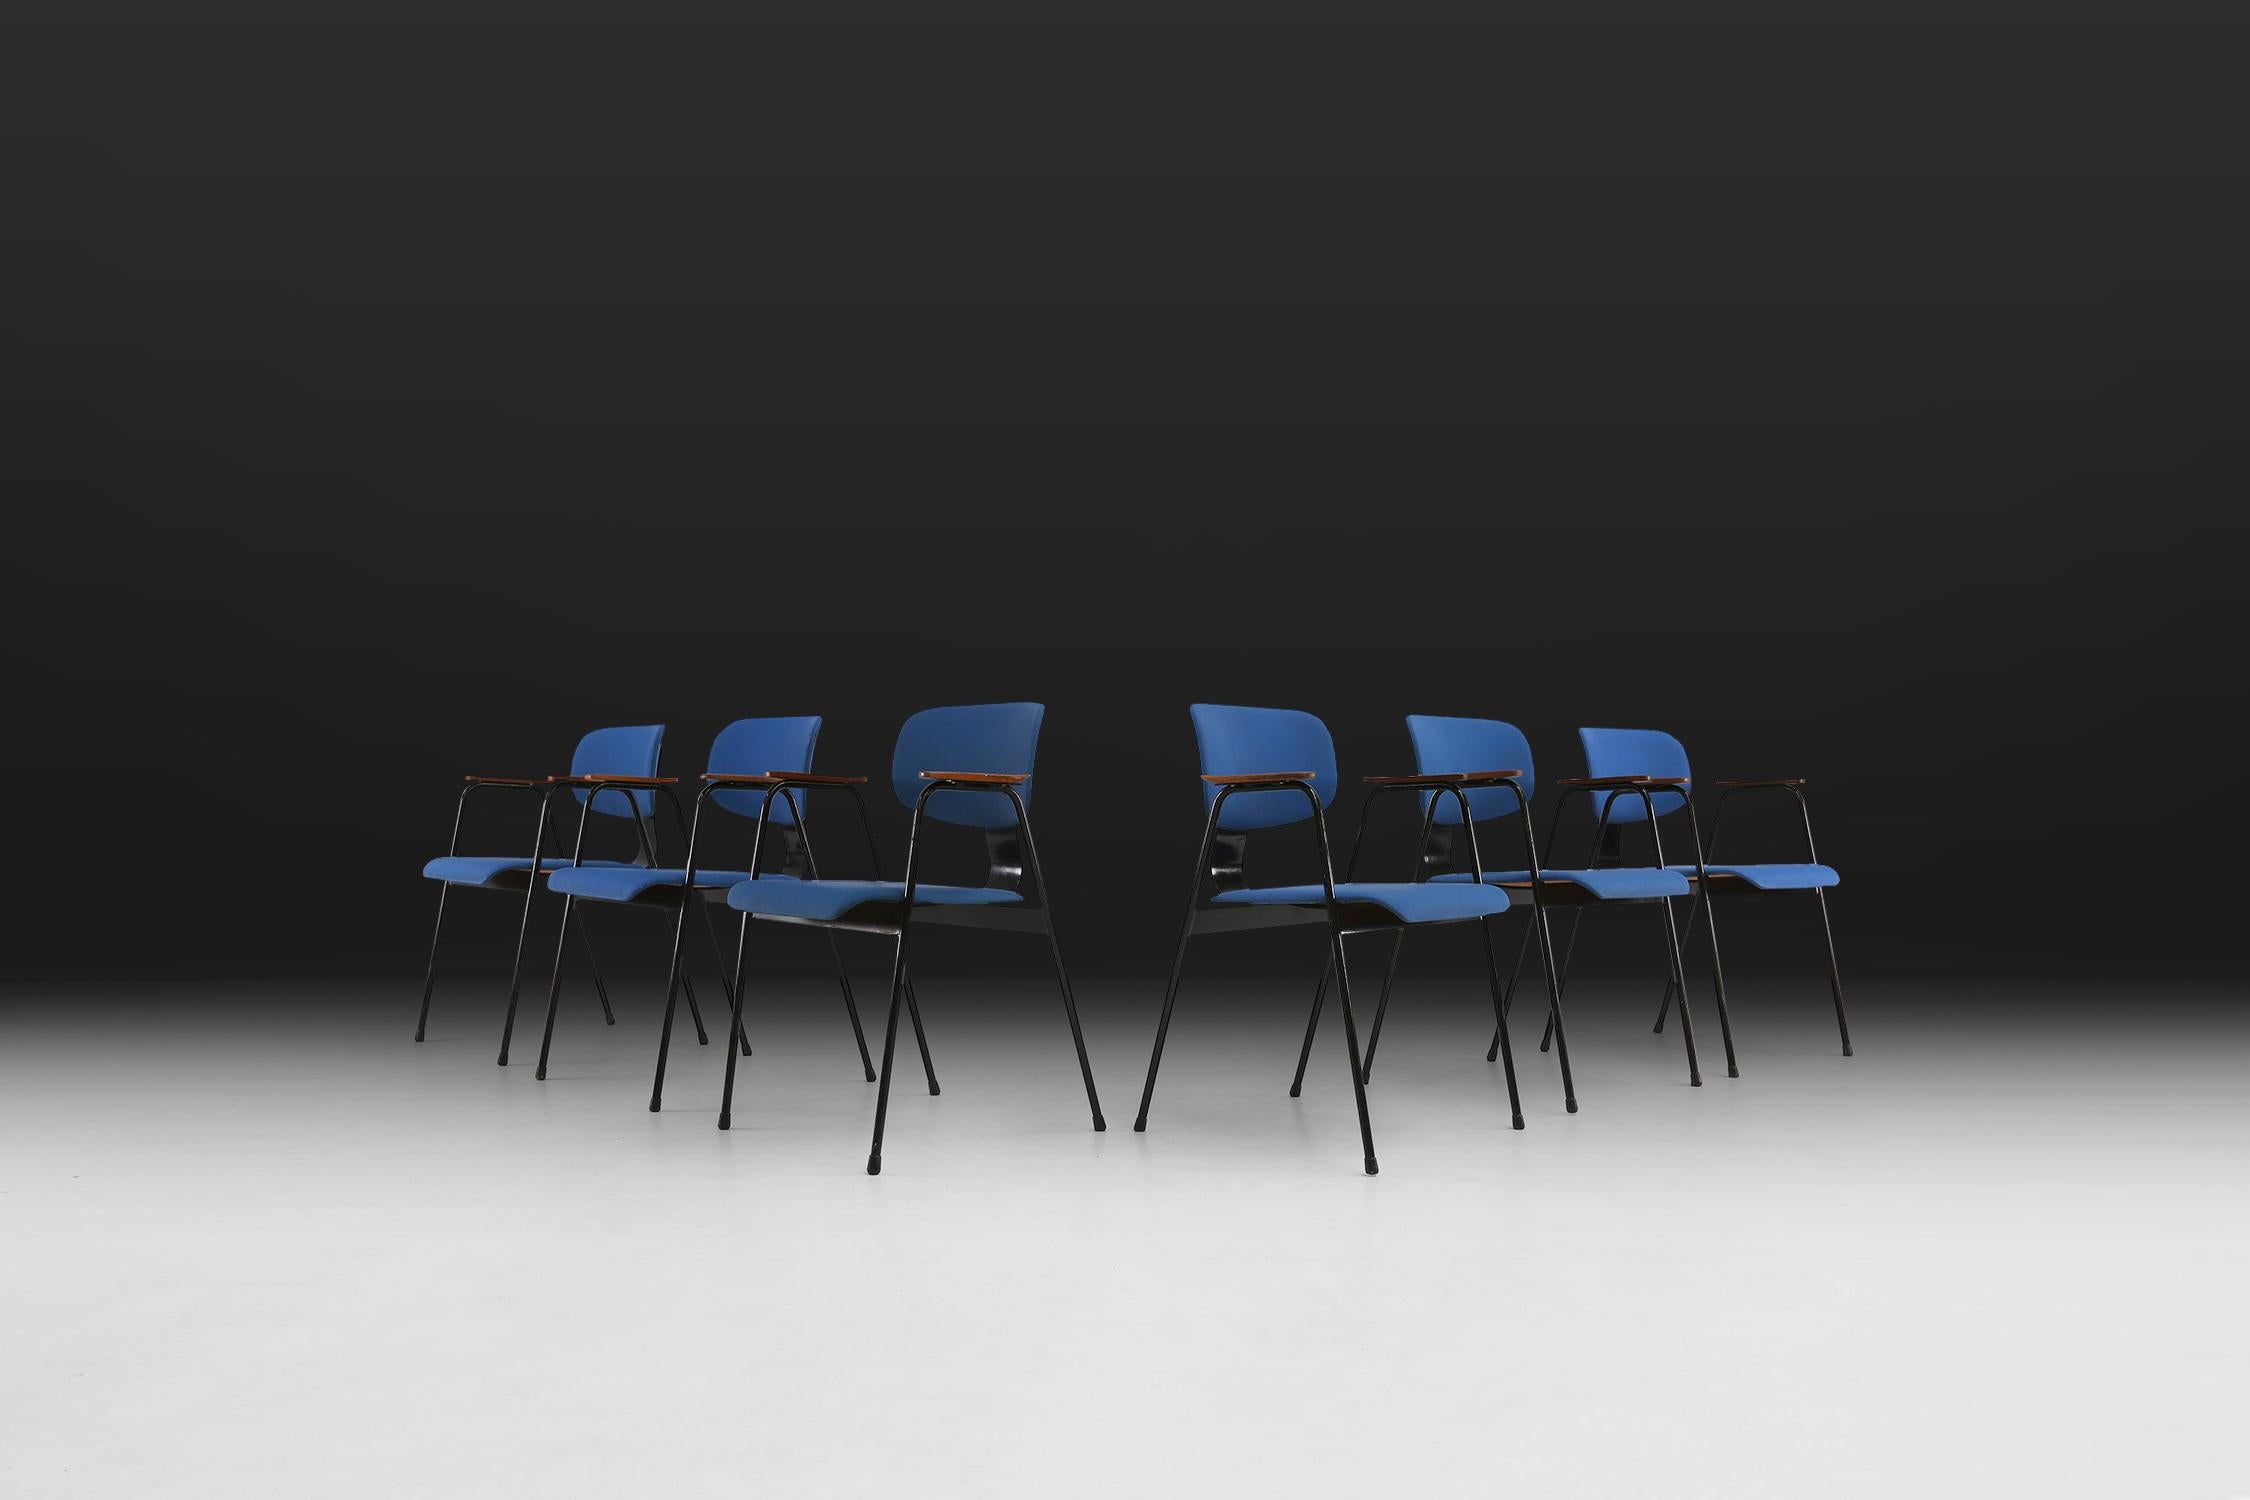 Six chairs by designer Willy Van Der Meeren for Tubax, circa 1950.
Have a black lacquered metal frame with blue vinyl seat.
The armrests are made of wood.

Van Der Meeren is considered one of the most important Belgian furniture designers of the